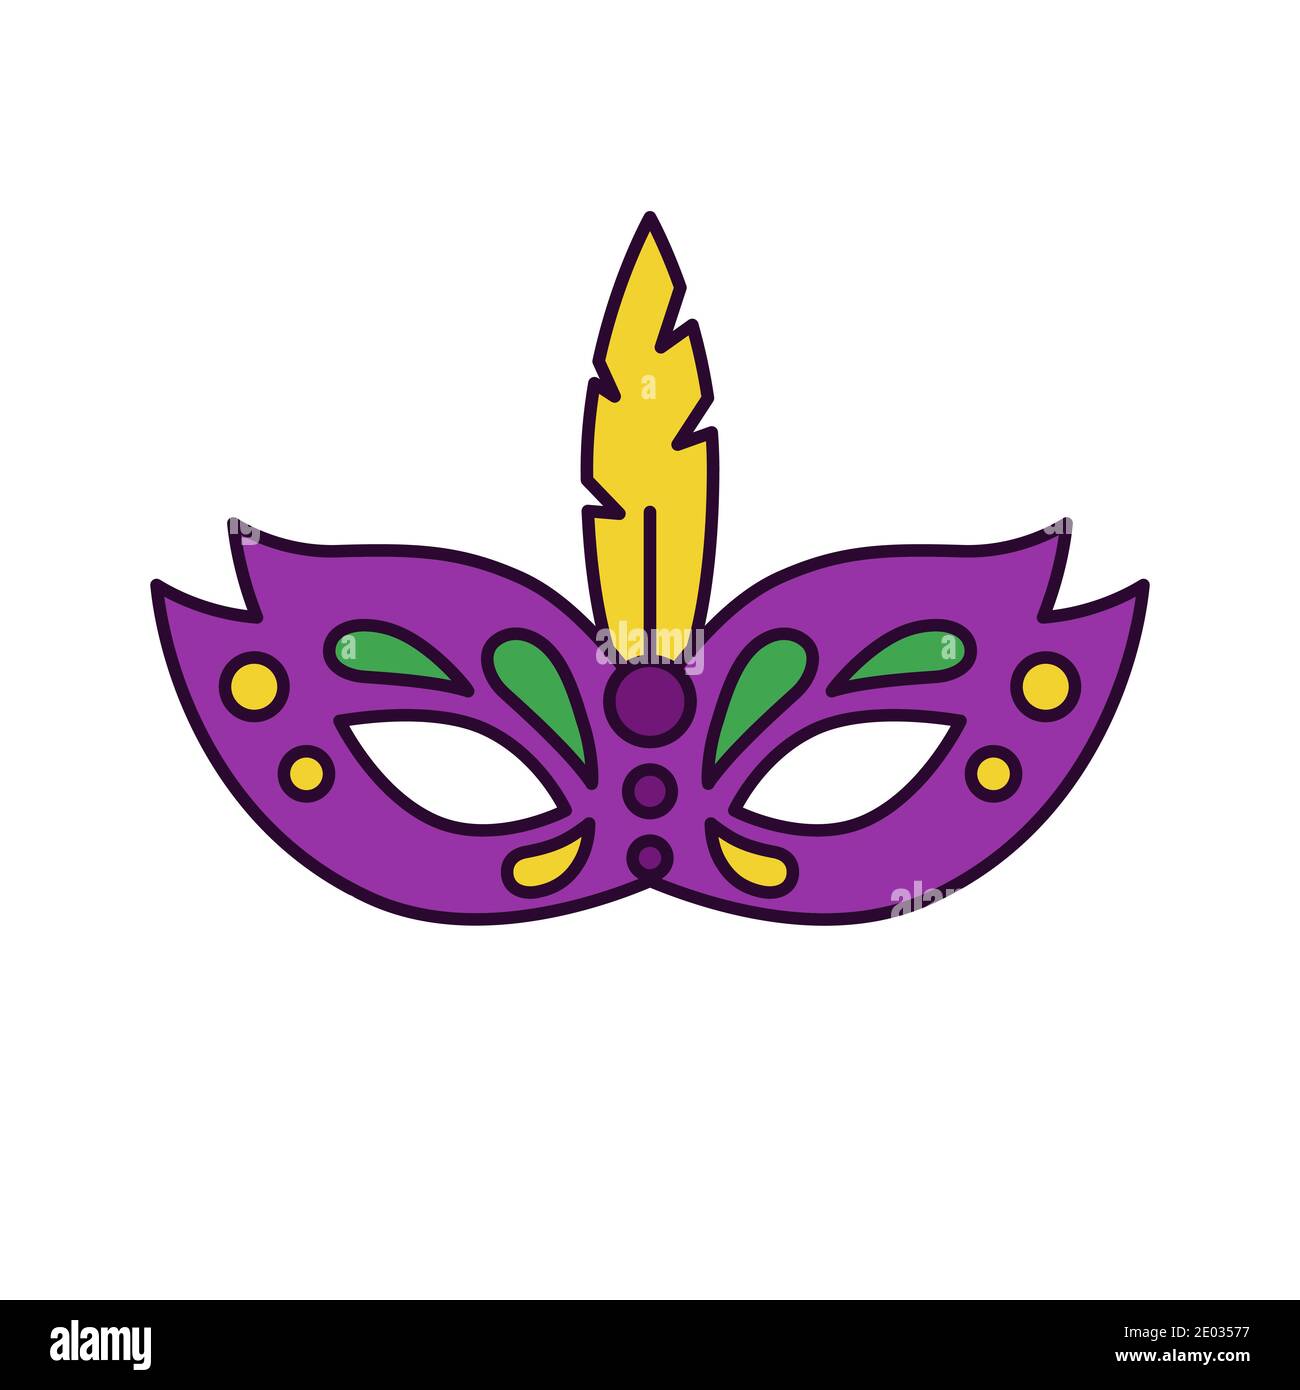 Bright icon of ornate venetian mask with feather and gems in traditional purple-green-yellow palette. Symbol of Mardi Gras or Fat Tuesday Stock Vector